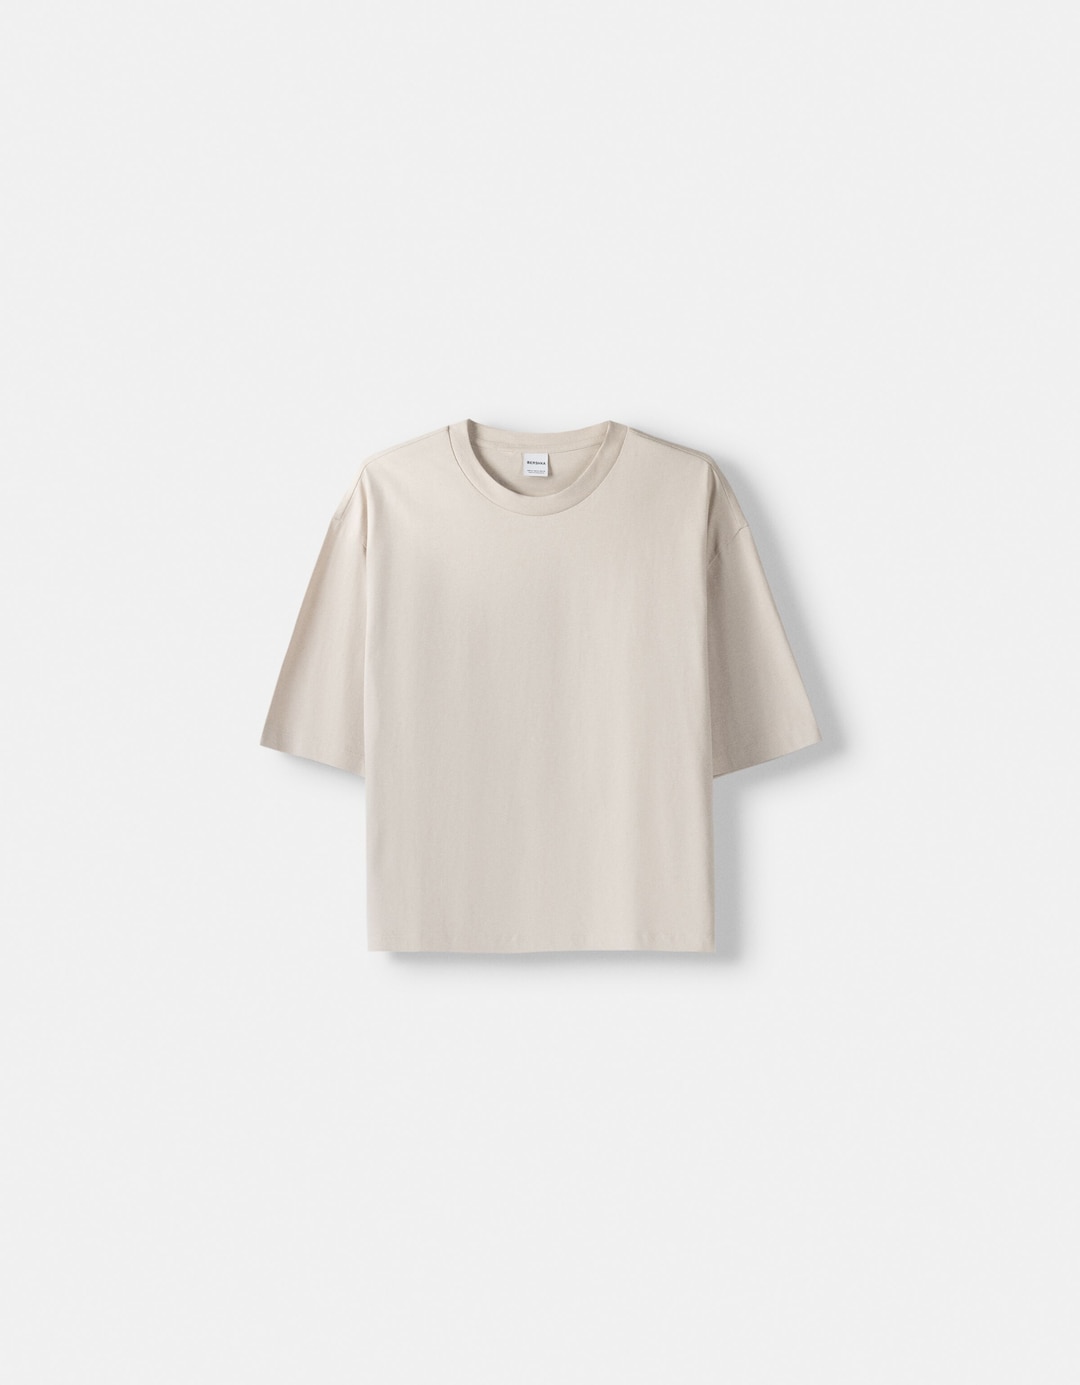 Boxy fit cropped short sleeve T-shirt